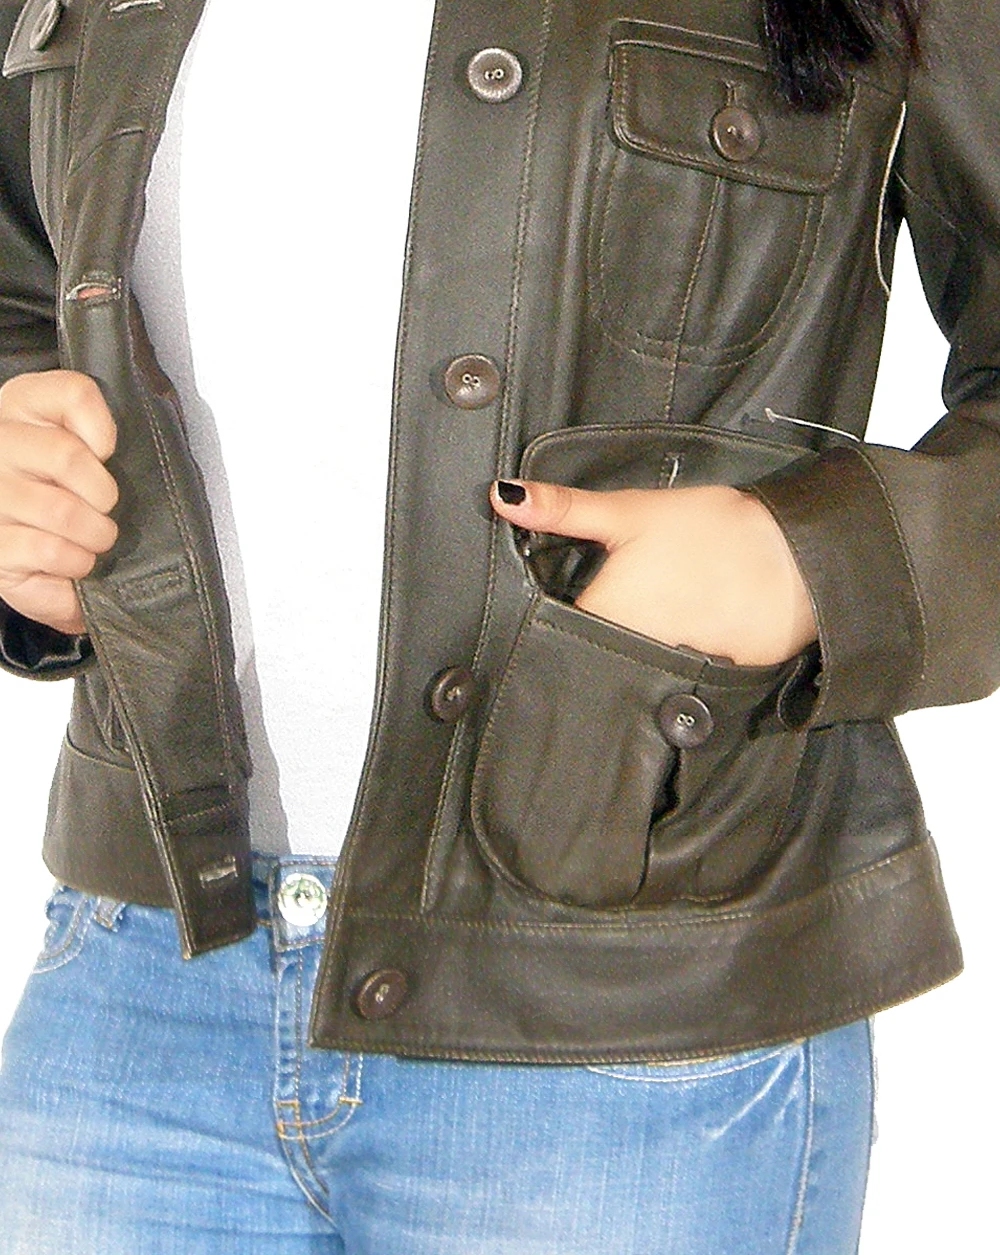 Sew Button Leather Jacket